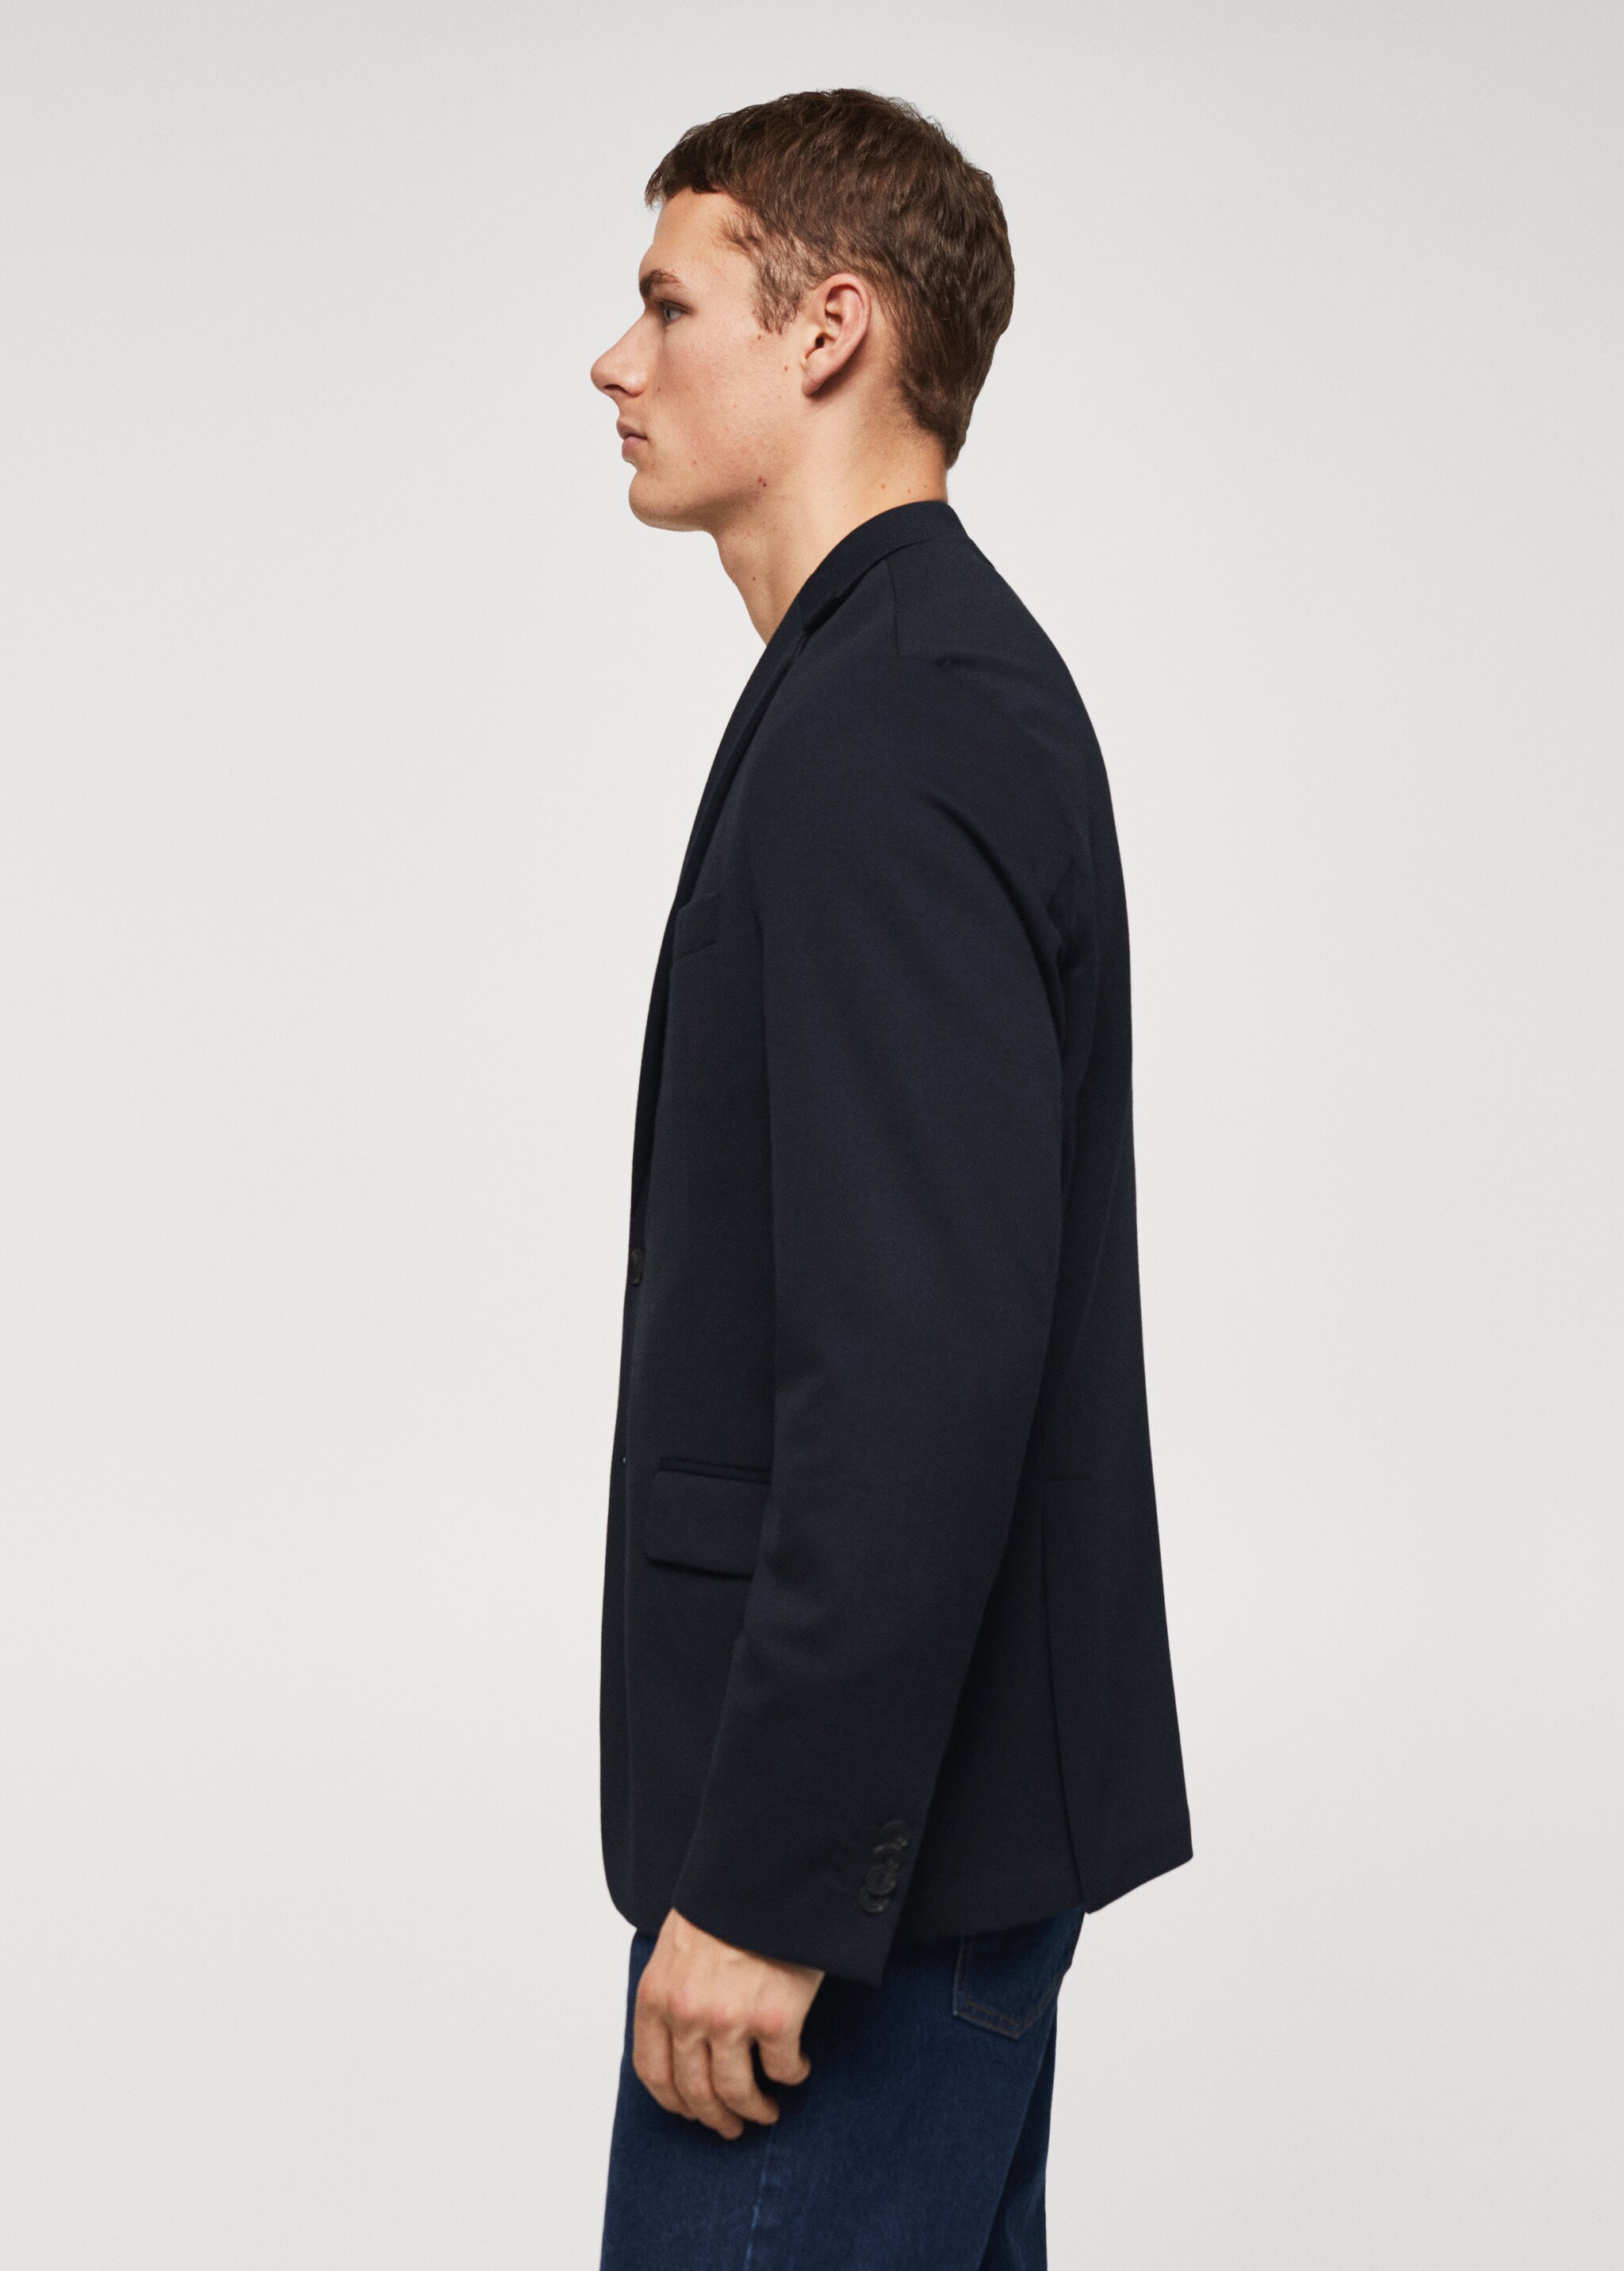 Slim fit microstructure blazer - Details of the article 6